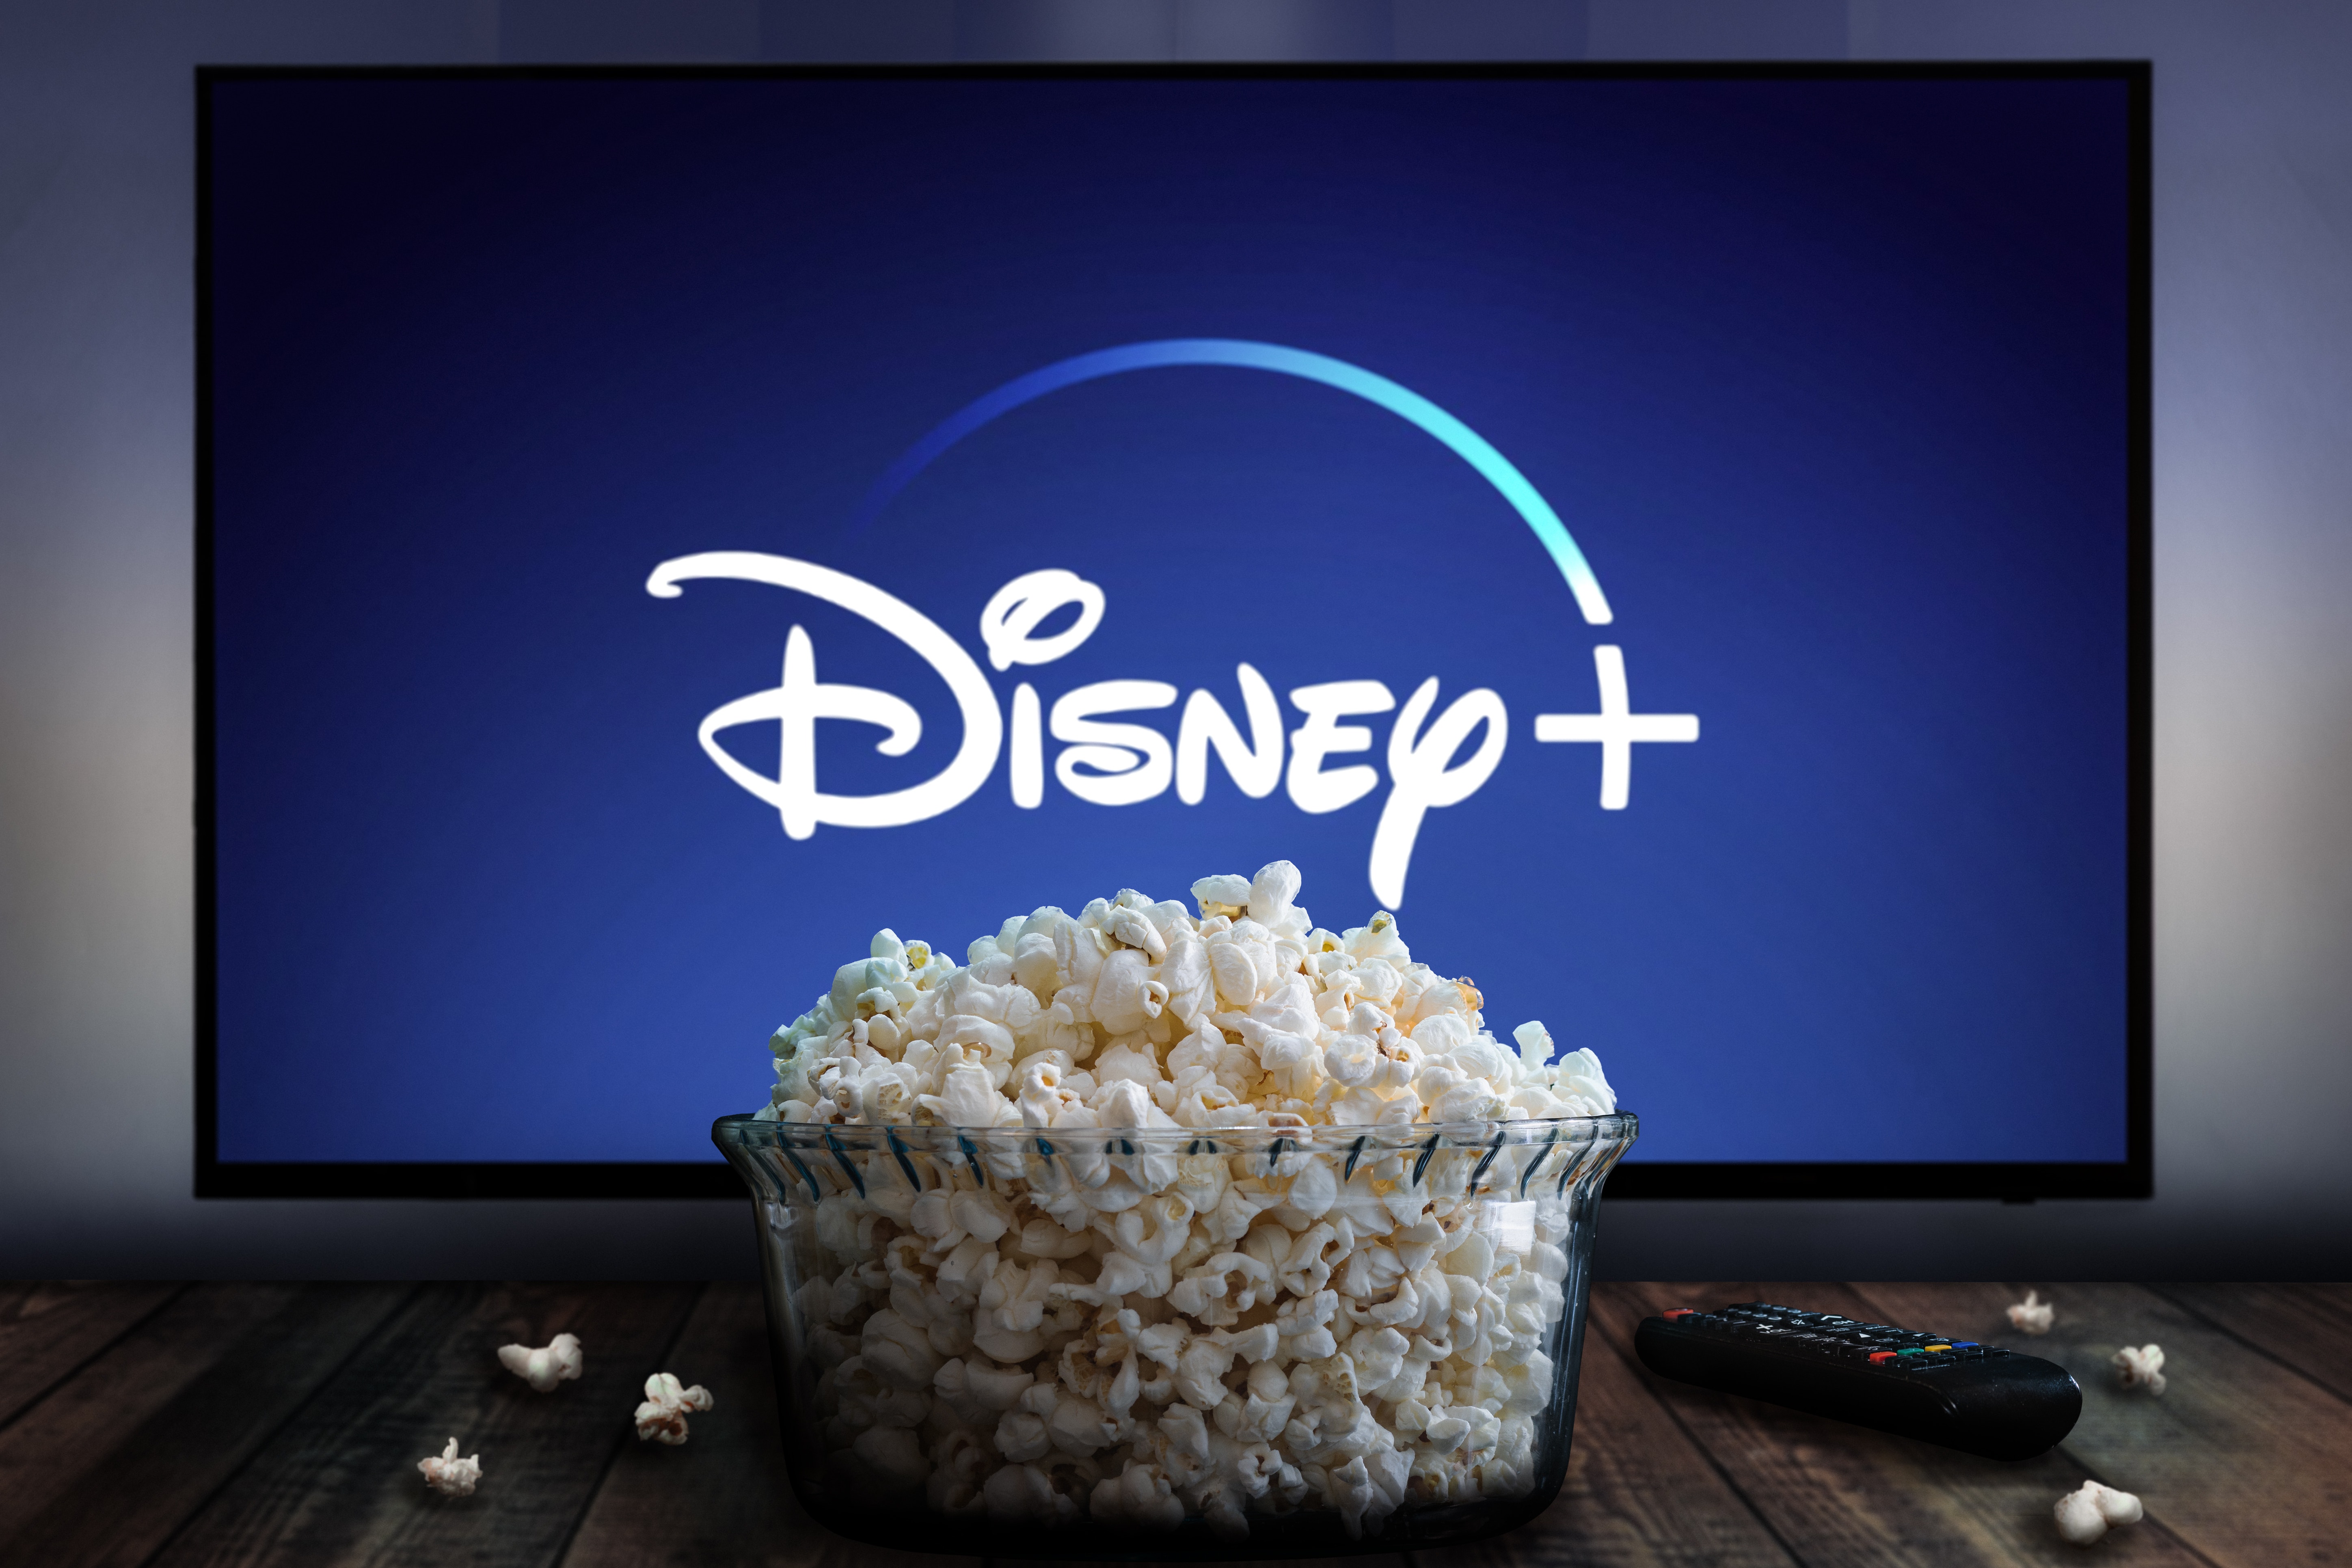 Disney+ Relaunches On PS5 Consoles With 4K HDR Support — But Are Streaming Sticks Still Better?